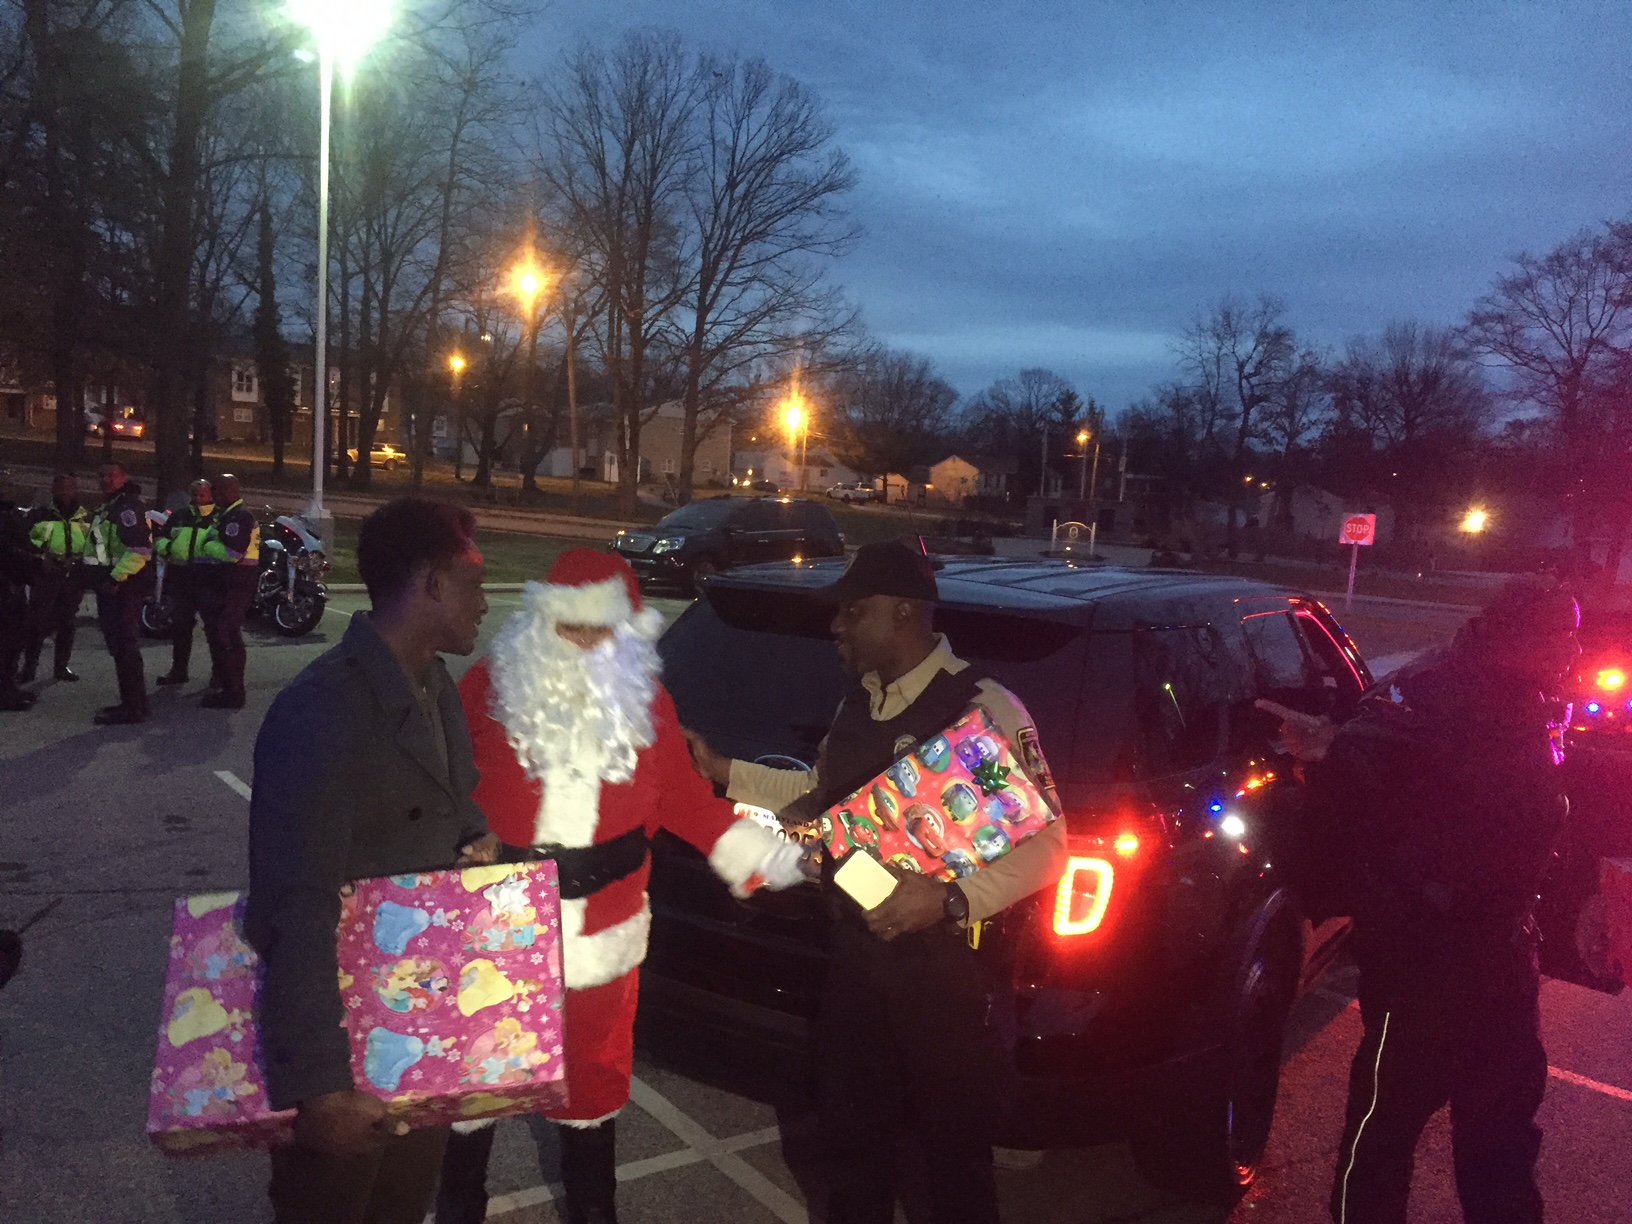 Thanks to Corporal Randy Green and the Maryland-National Capital Park Police in Prince George's County, the Carter family has presents under their tree. (WTOP/Mike Murillo)